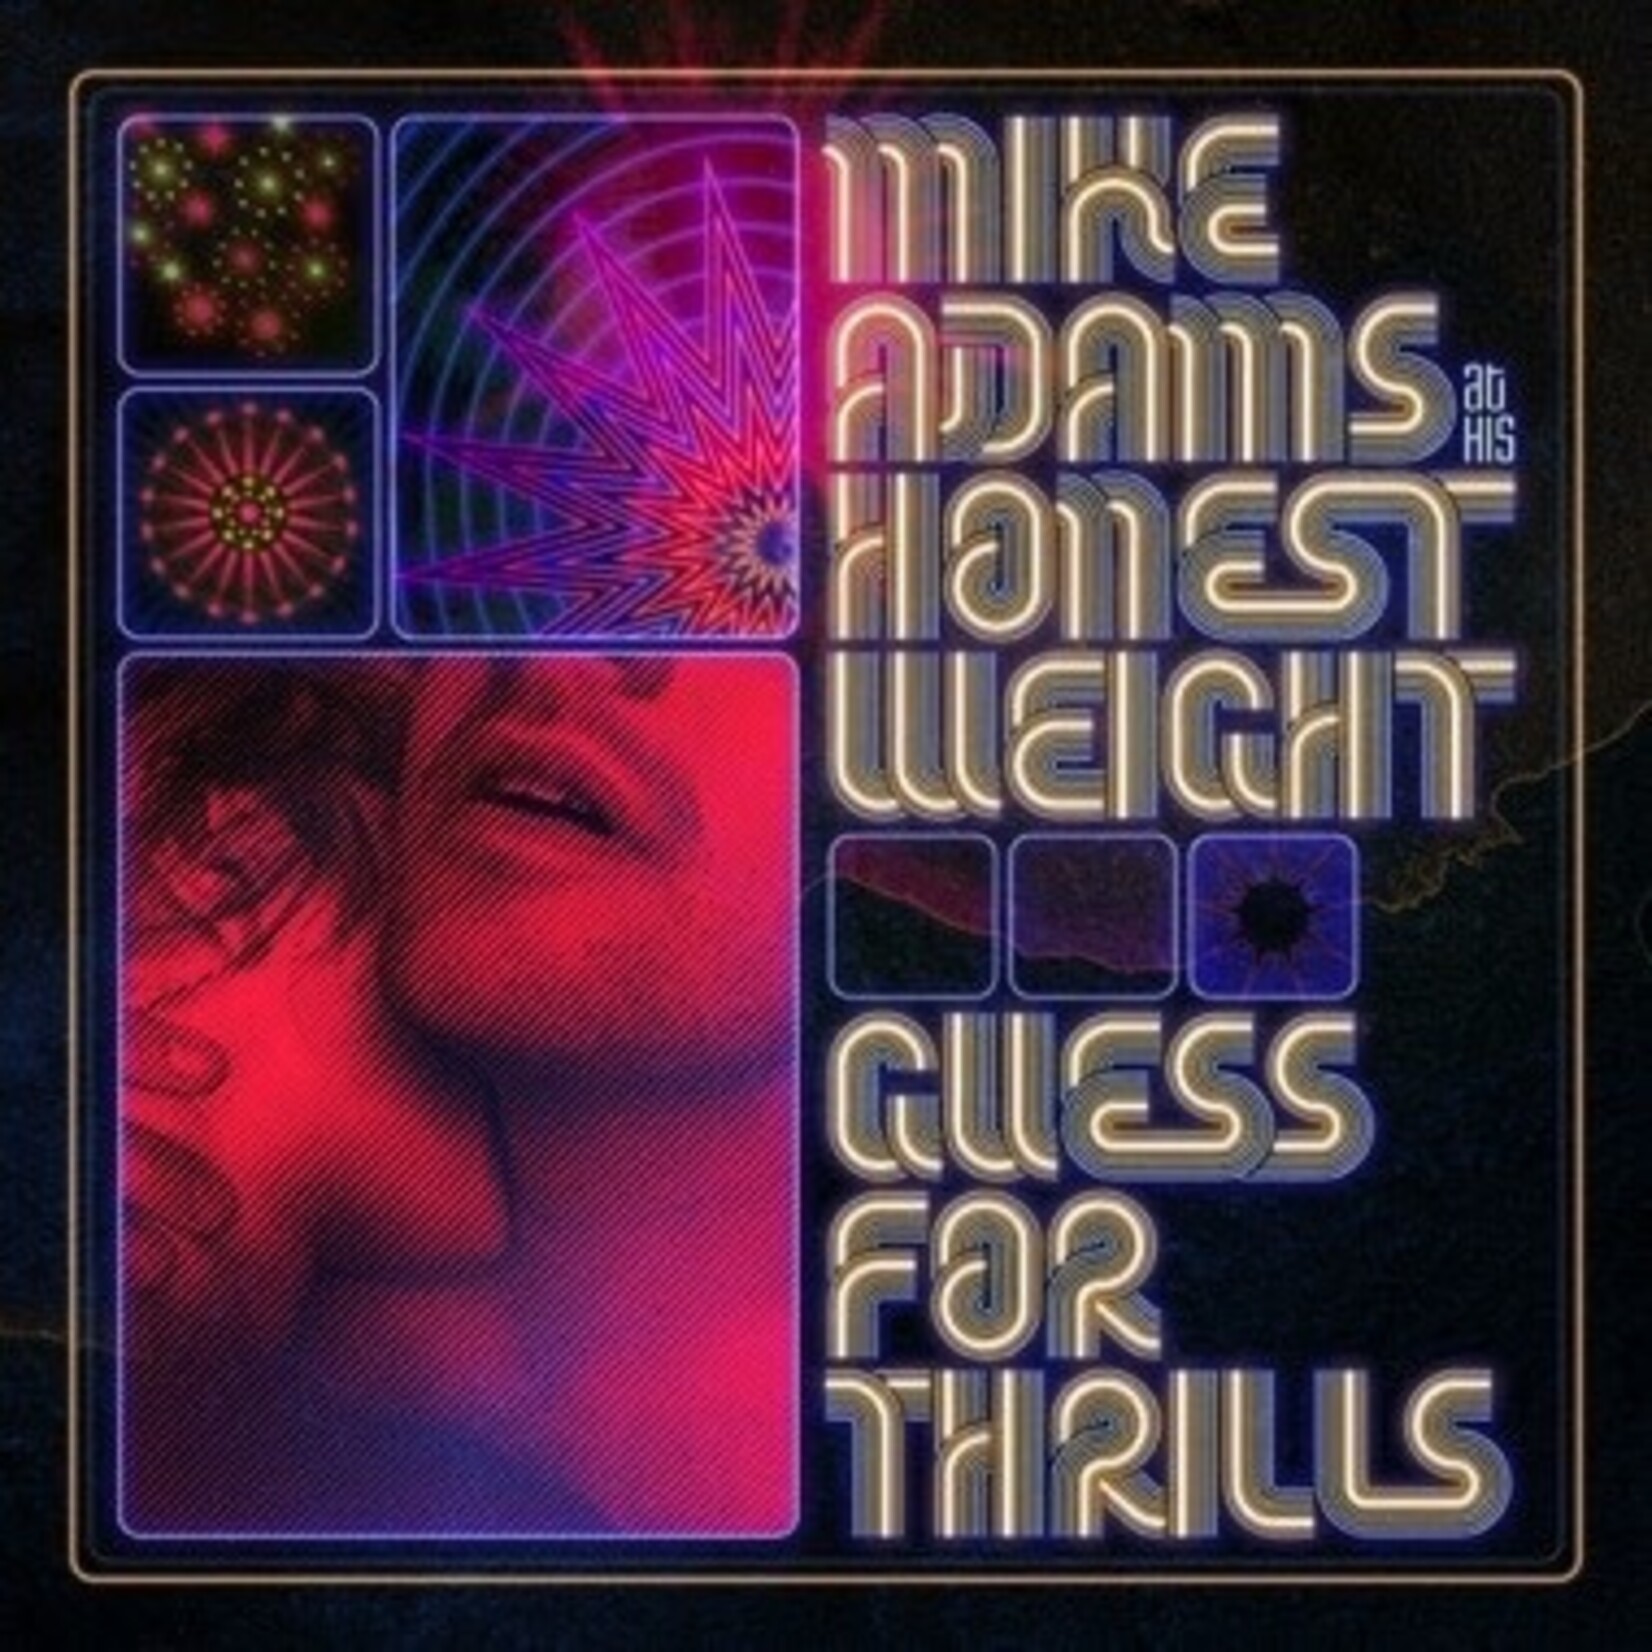 Joyful Noise Recordings Mike Adams At His Honest Weight - Guess For Thrills (LP)